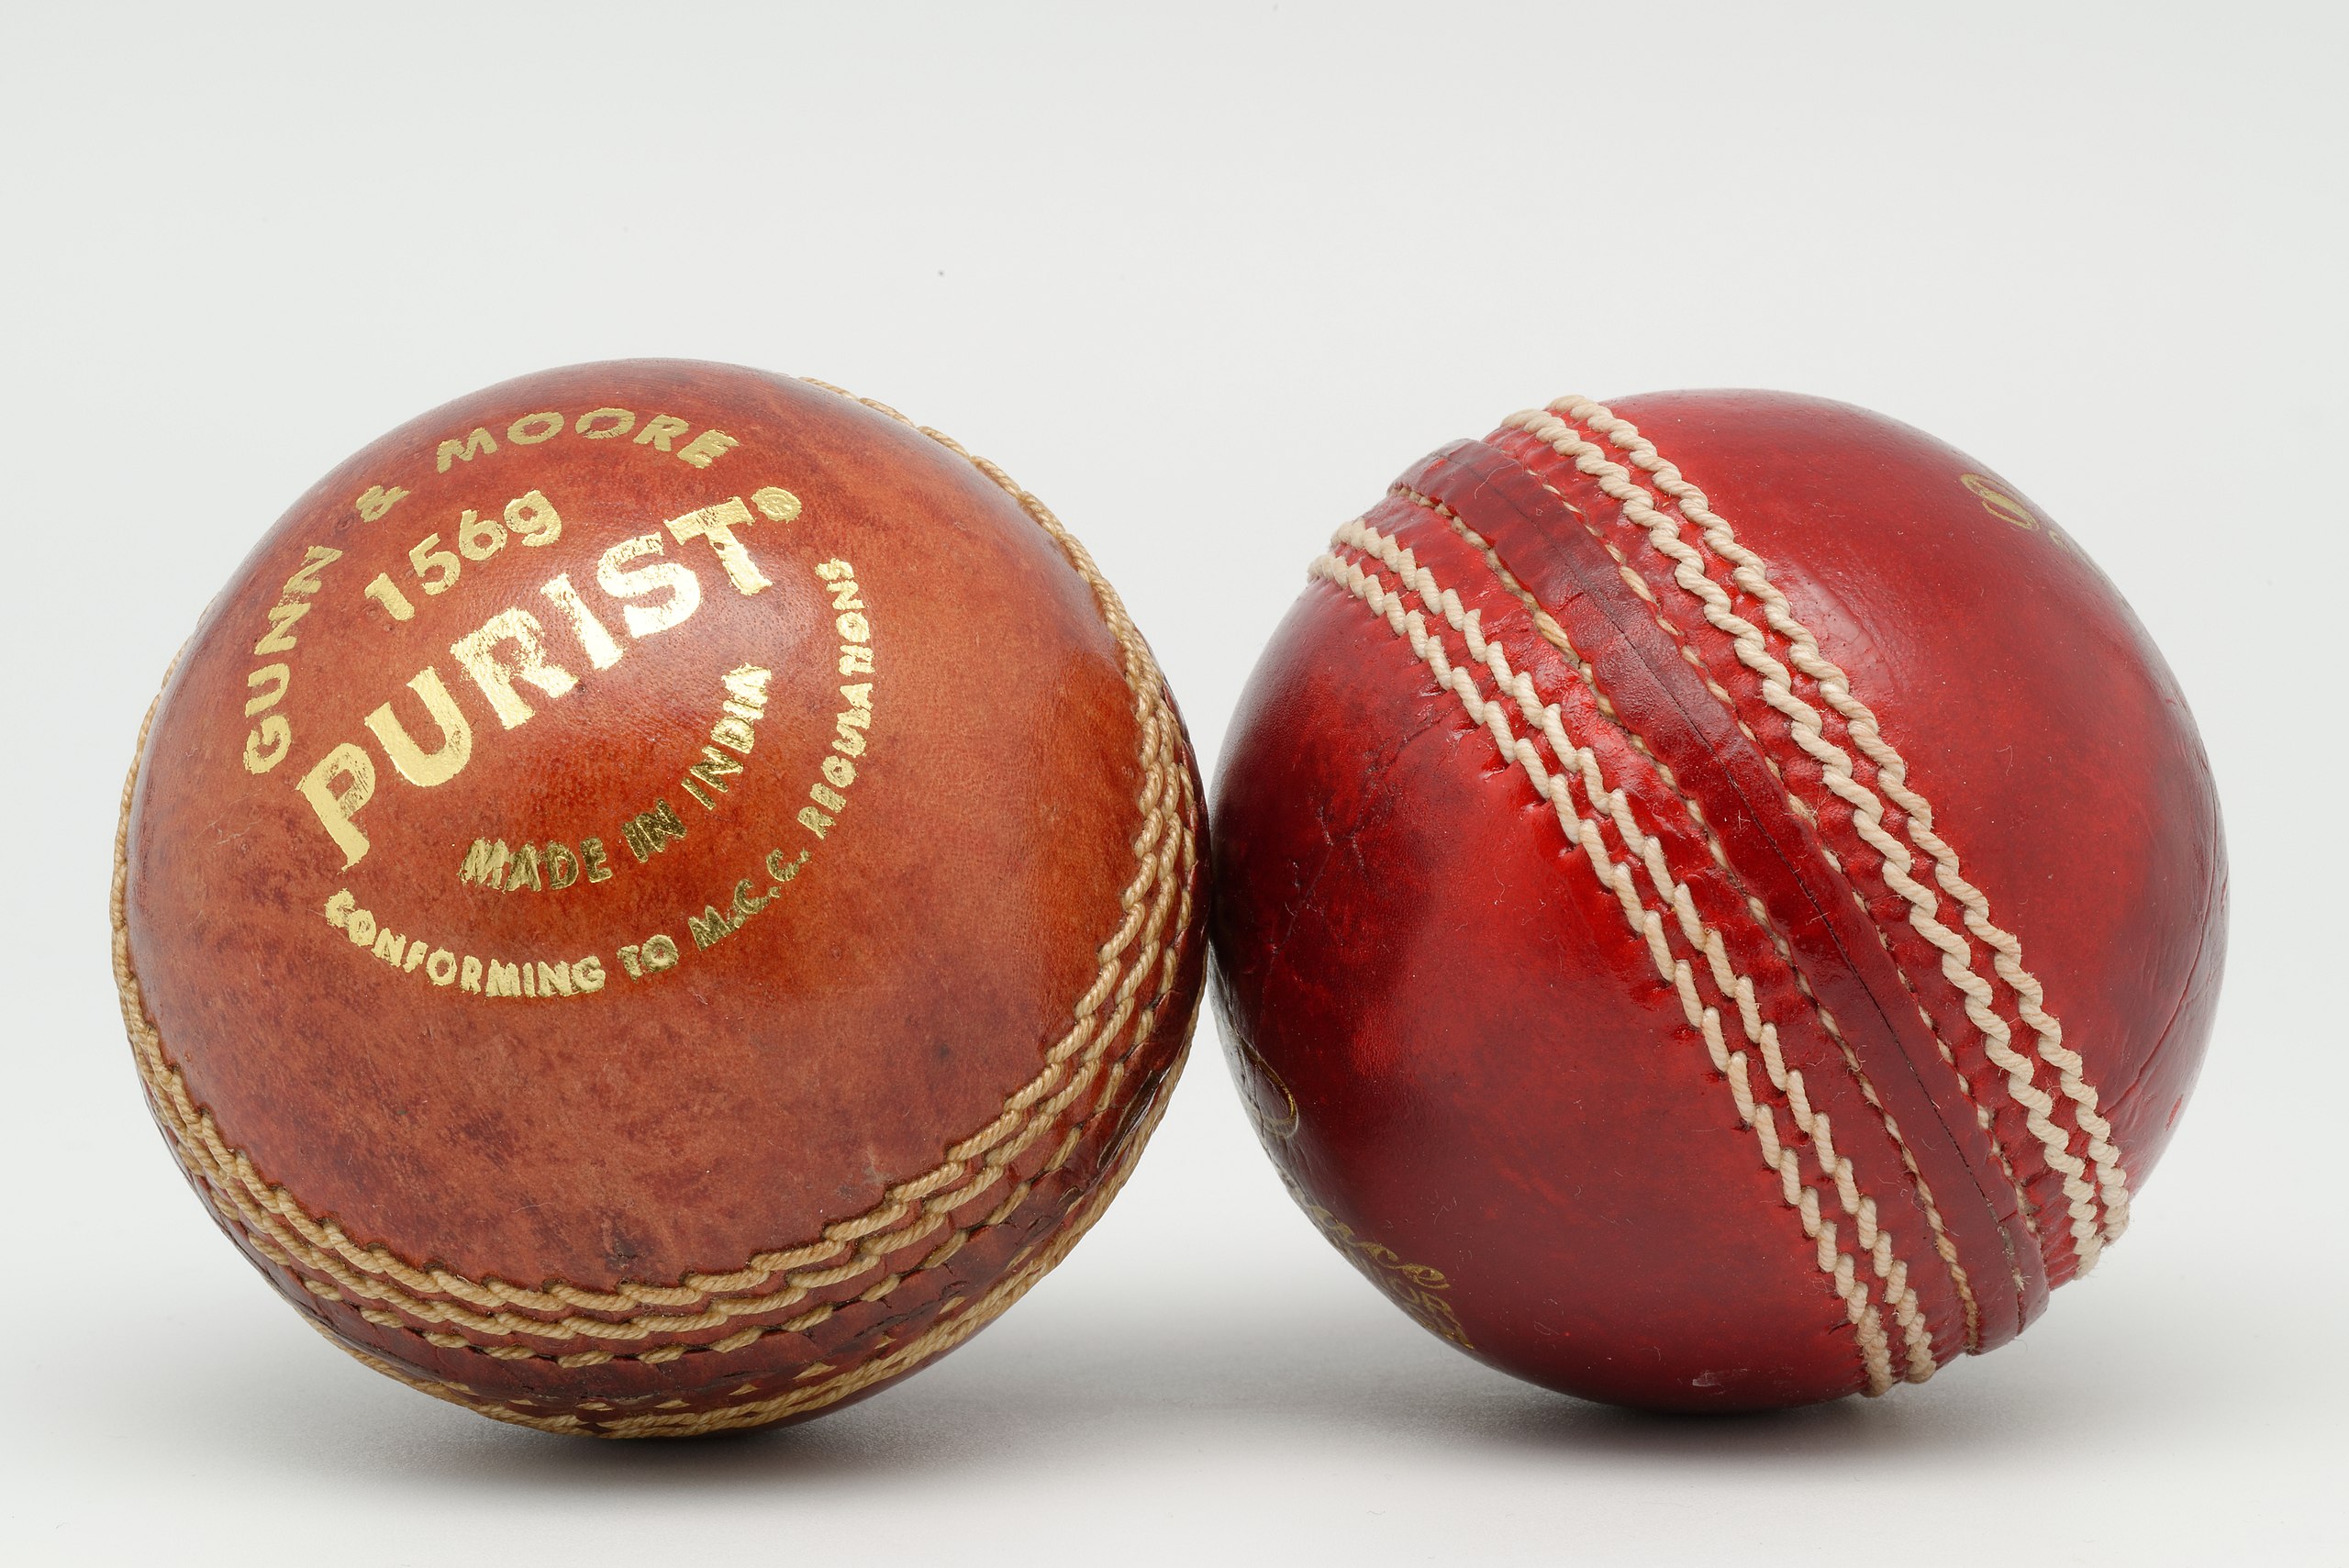 Two cricket balls to illustrate the question 